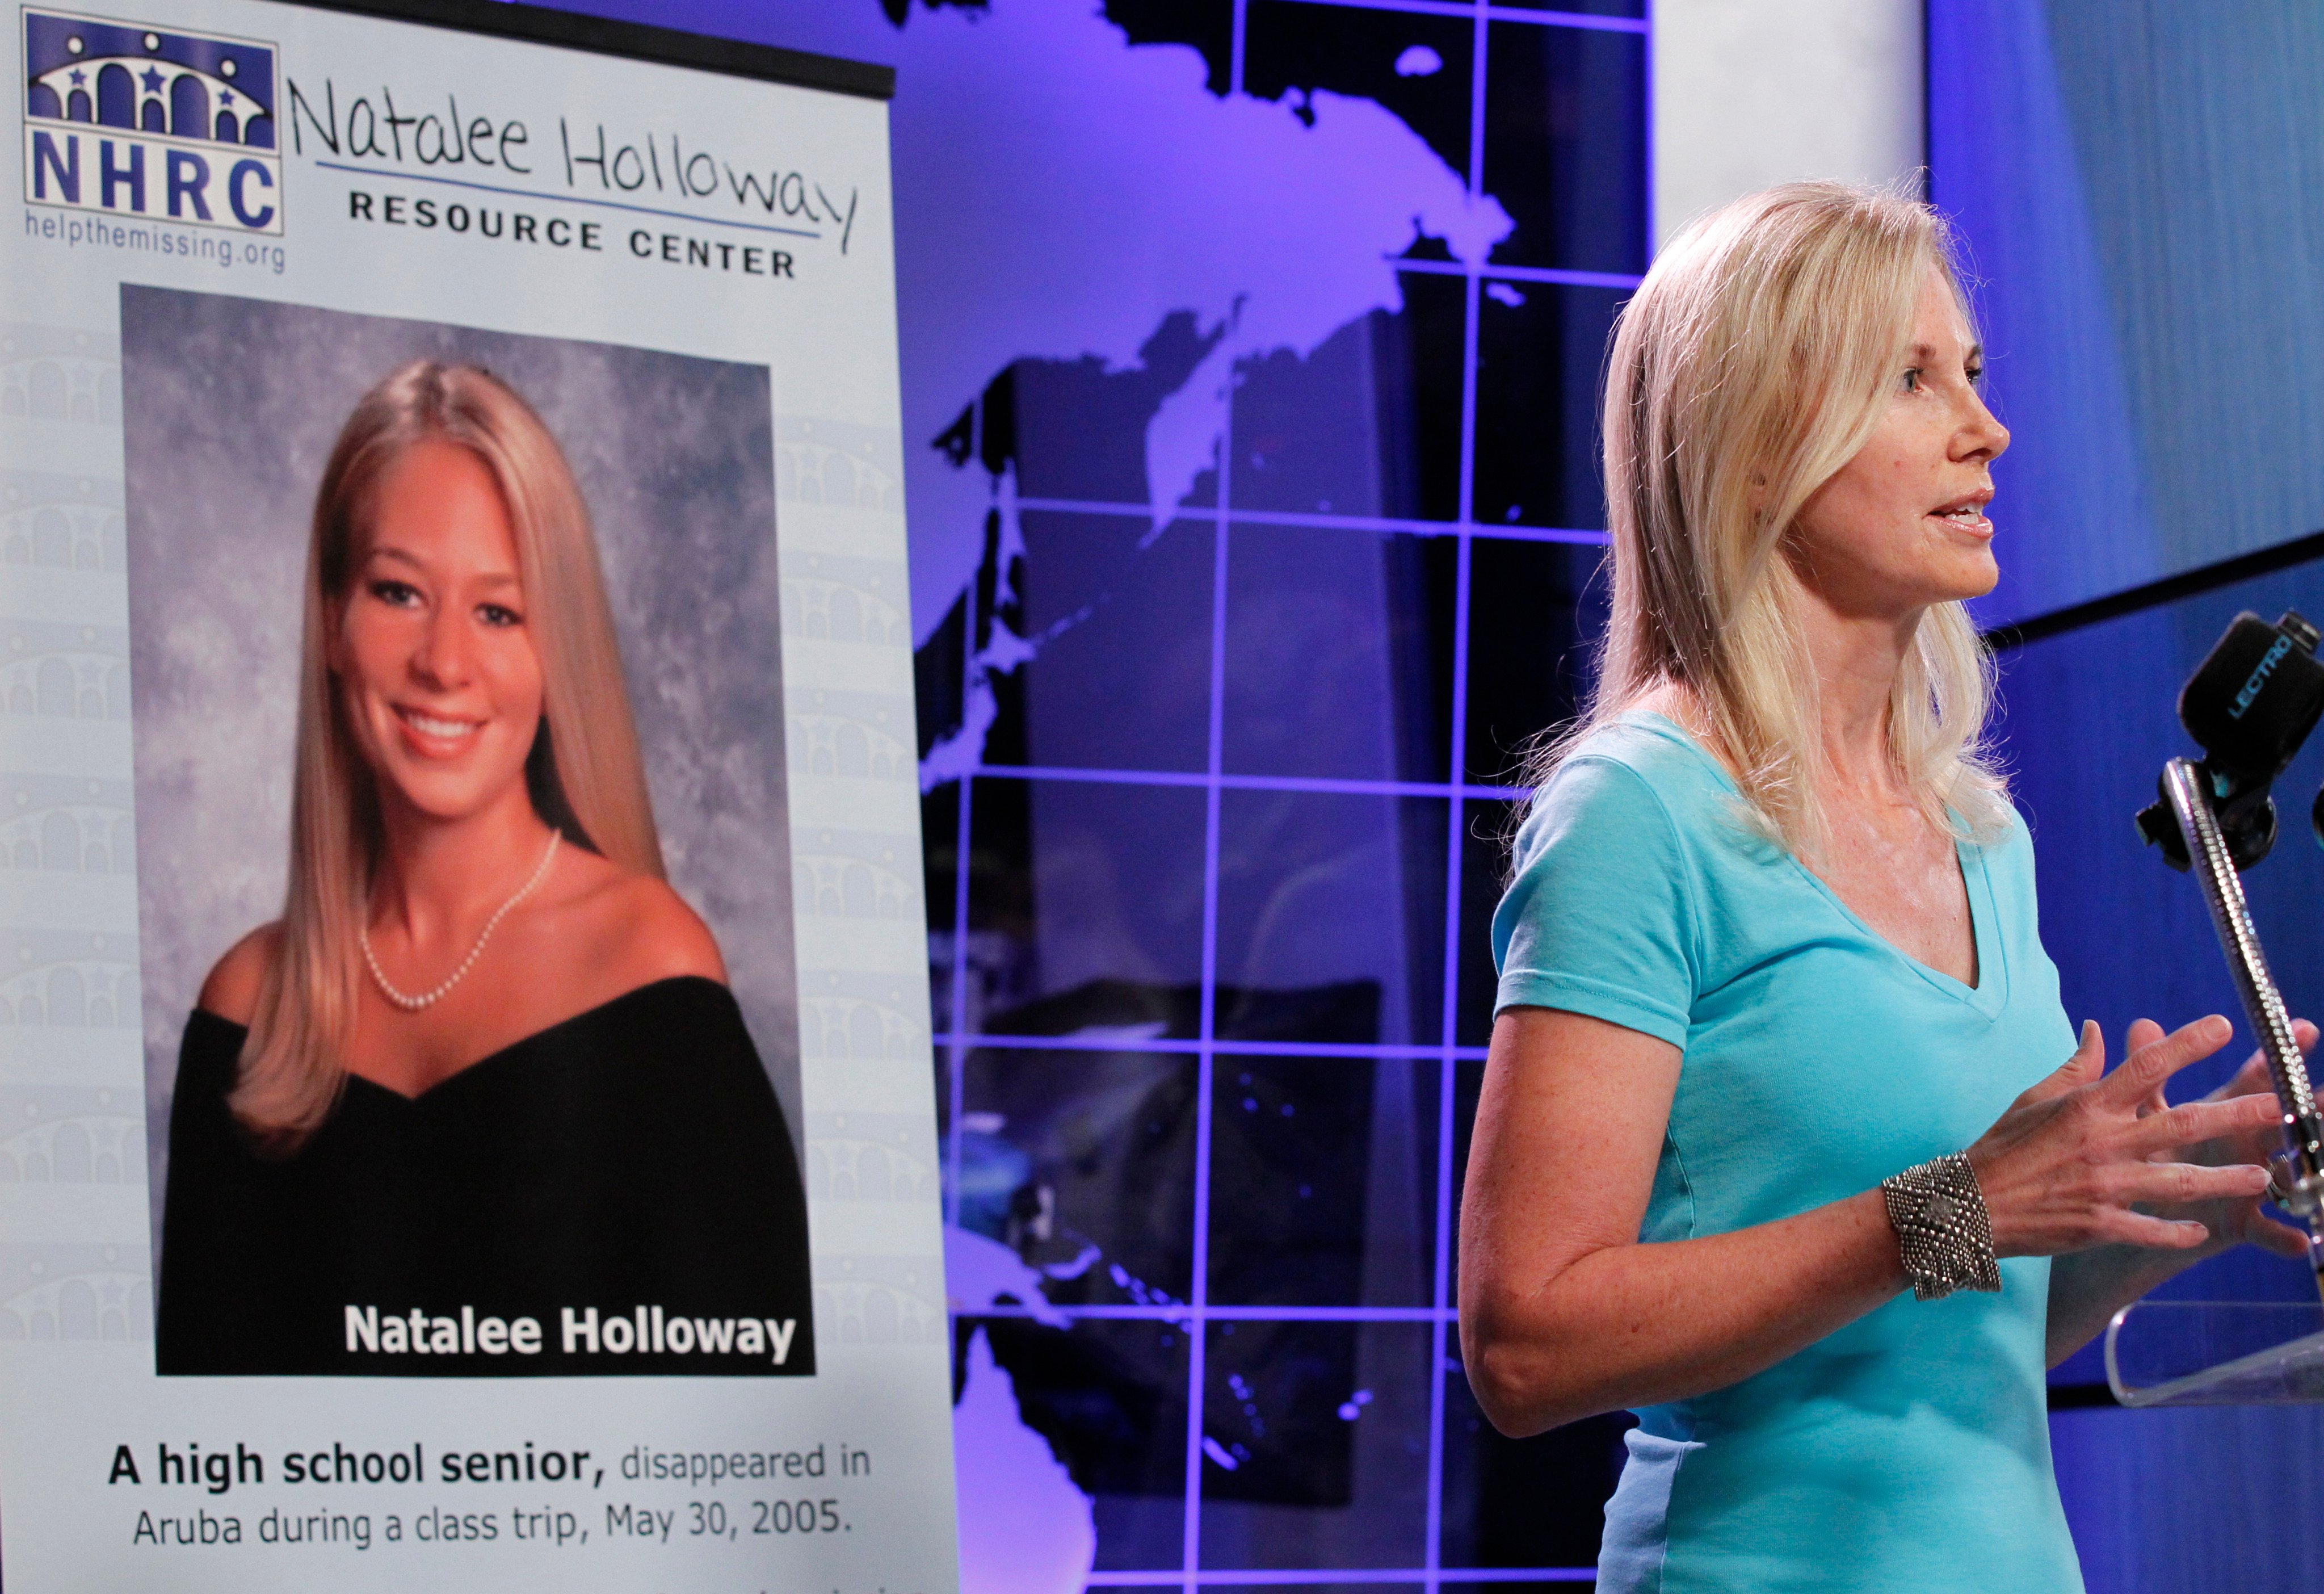 Beth Holloway, mother of Natalee Holloway, speaks during the opening of the Natalee Holloway Resource Centre at the National Museum of Crime & Punishment in Washington in June 2010. Photo: AP